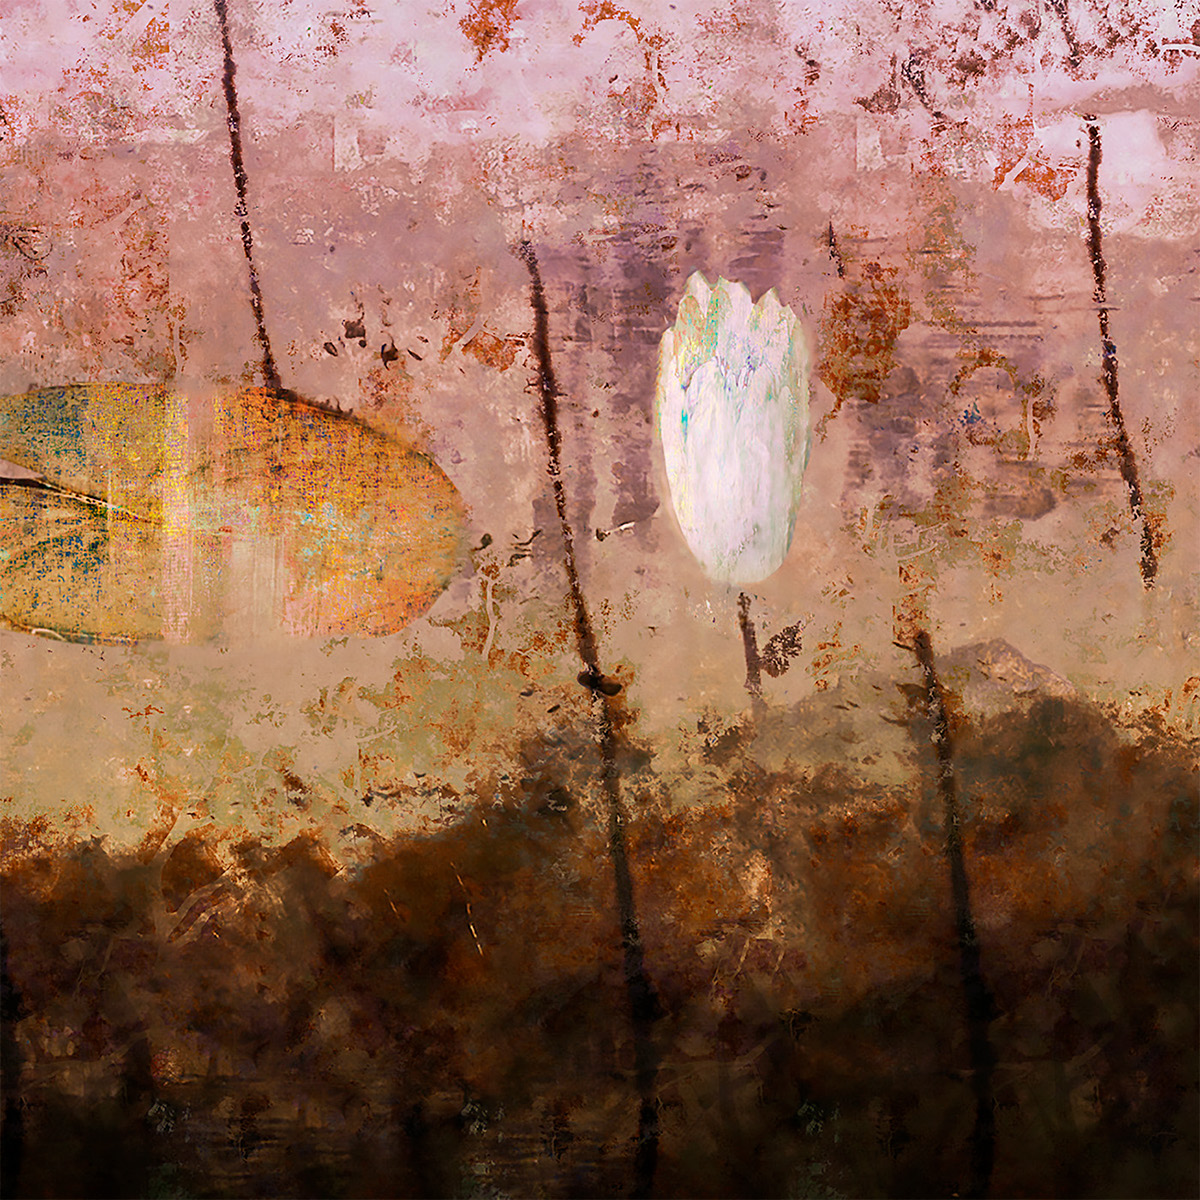 lily pond water lily flower Lotus dreamscape Nature painterly collage spiritual